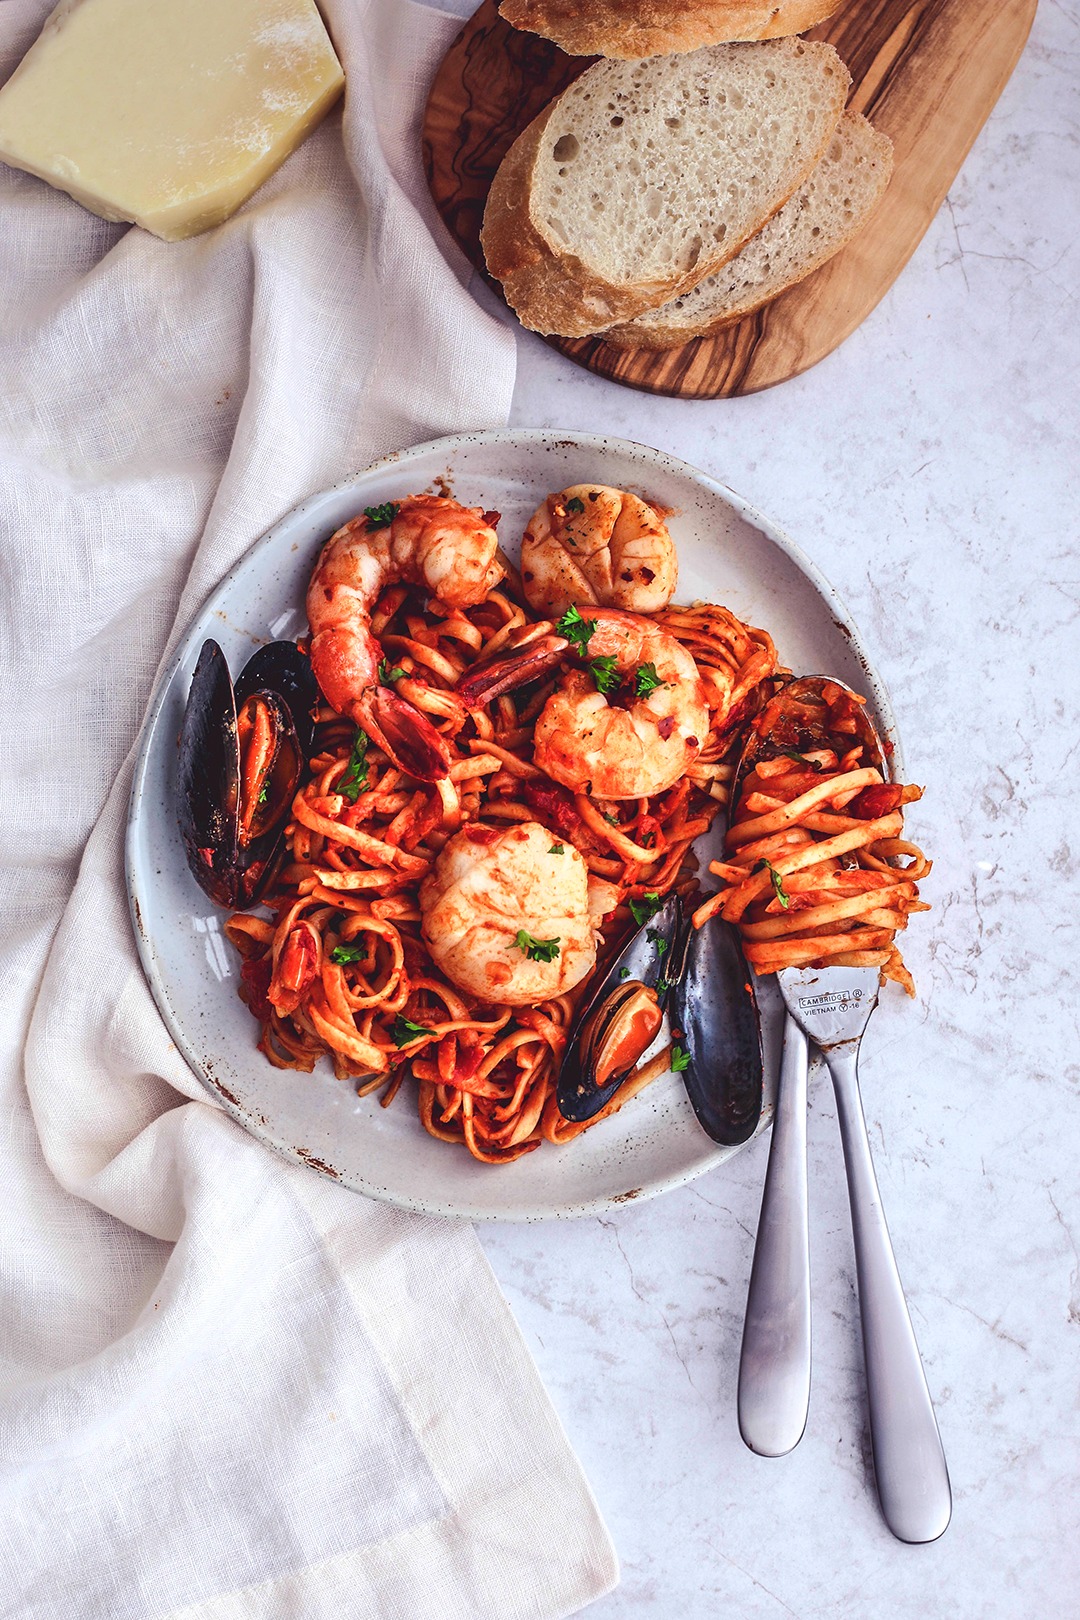 Fiery One-Pot Seafood Pasta With Arrabbiata Sauce | Killing Thyme